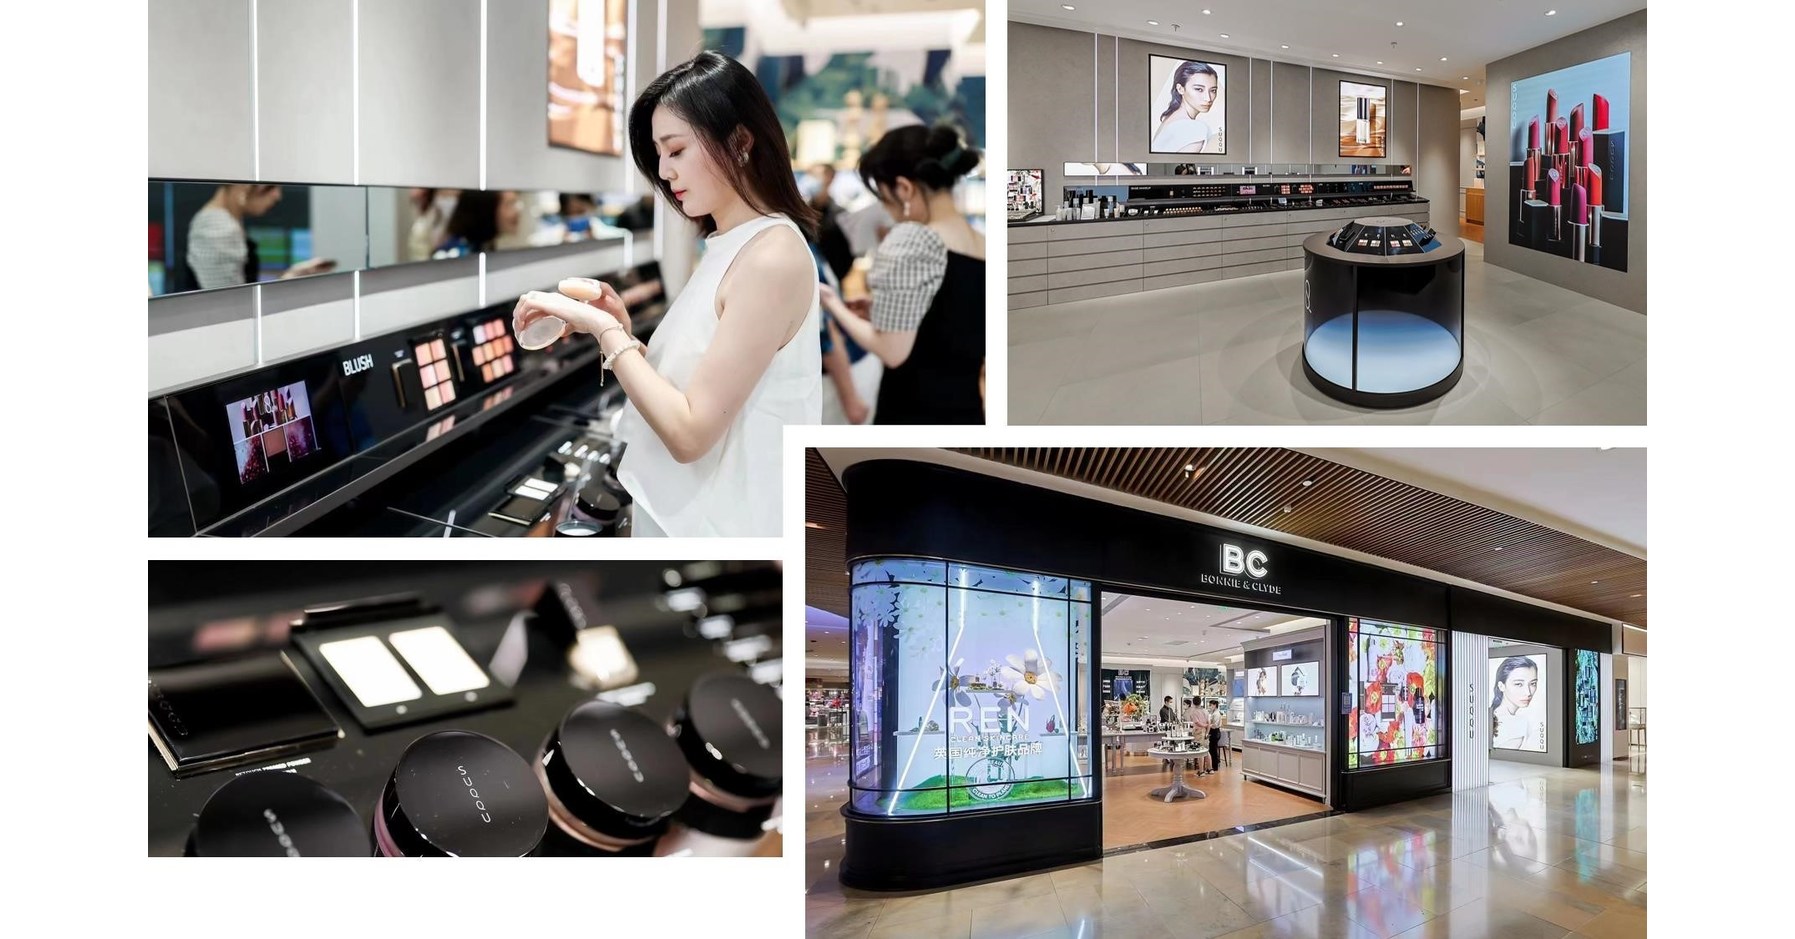 SUQQU launches China’s first retail experience with USHOPAL’s Bonnie&Clyde luxury beauty stores